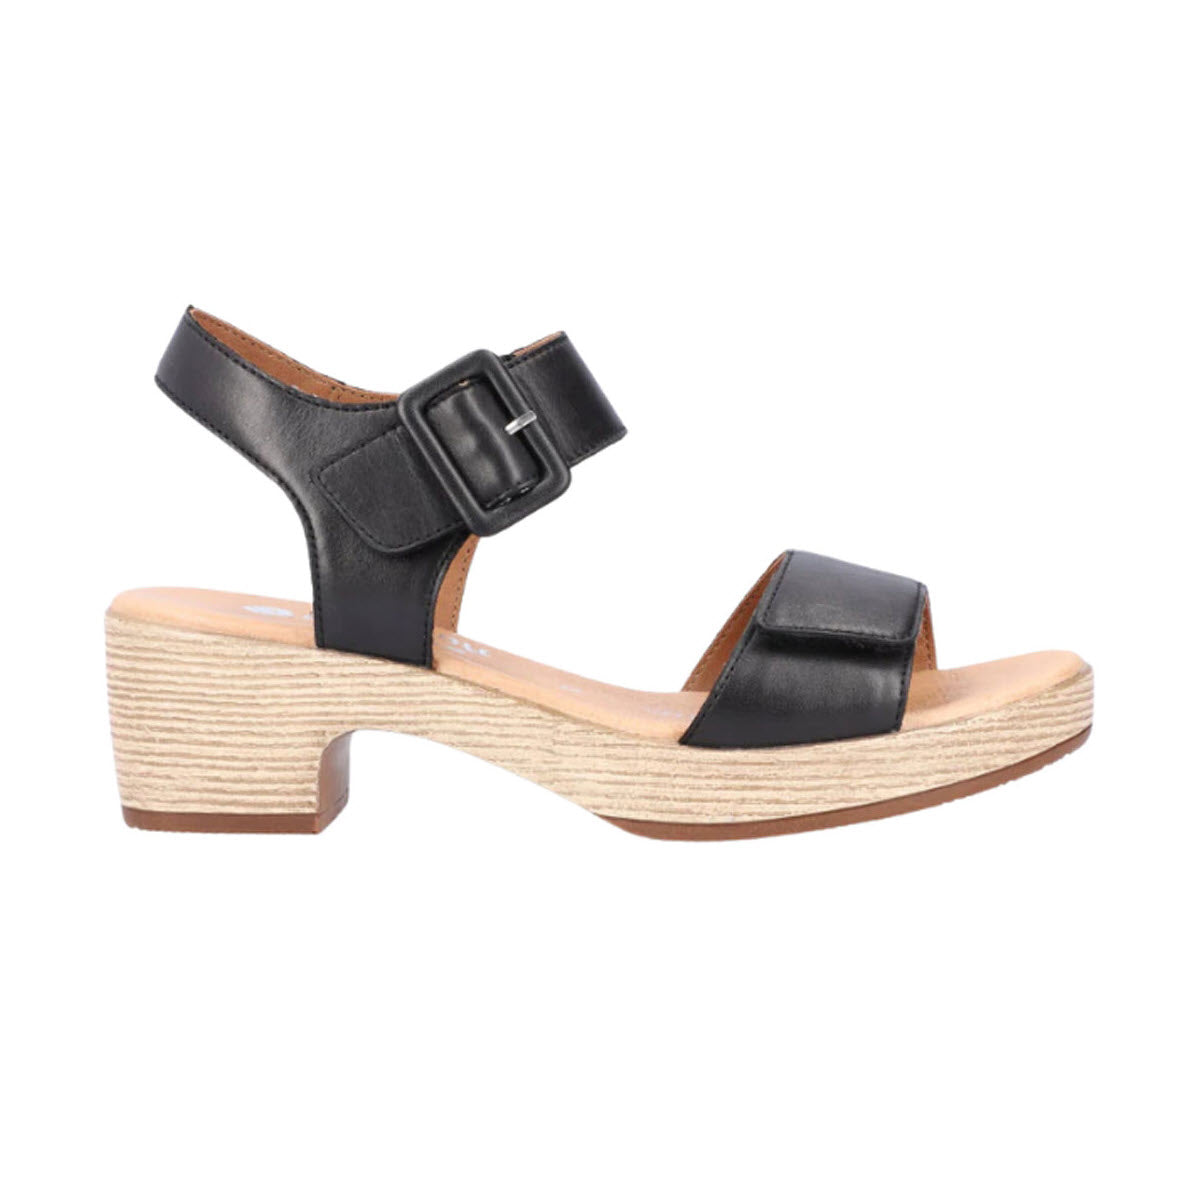 The Remonte REMONTE BLOCK HEEL SANDAL BLACK - WOMENS boasts a black leather upper with a thick heel, adjustable ankle strap with buckle, and a wide toe strap, complemented by a light wood-textured sole.